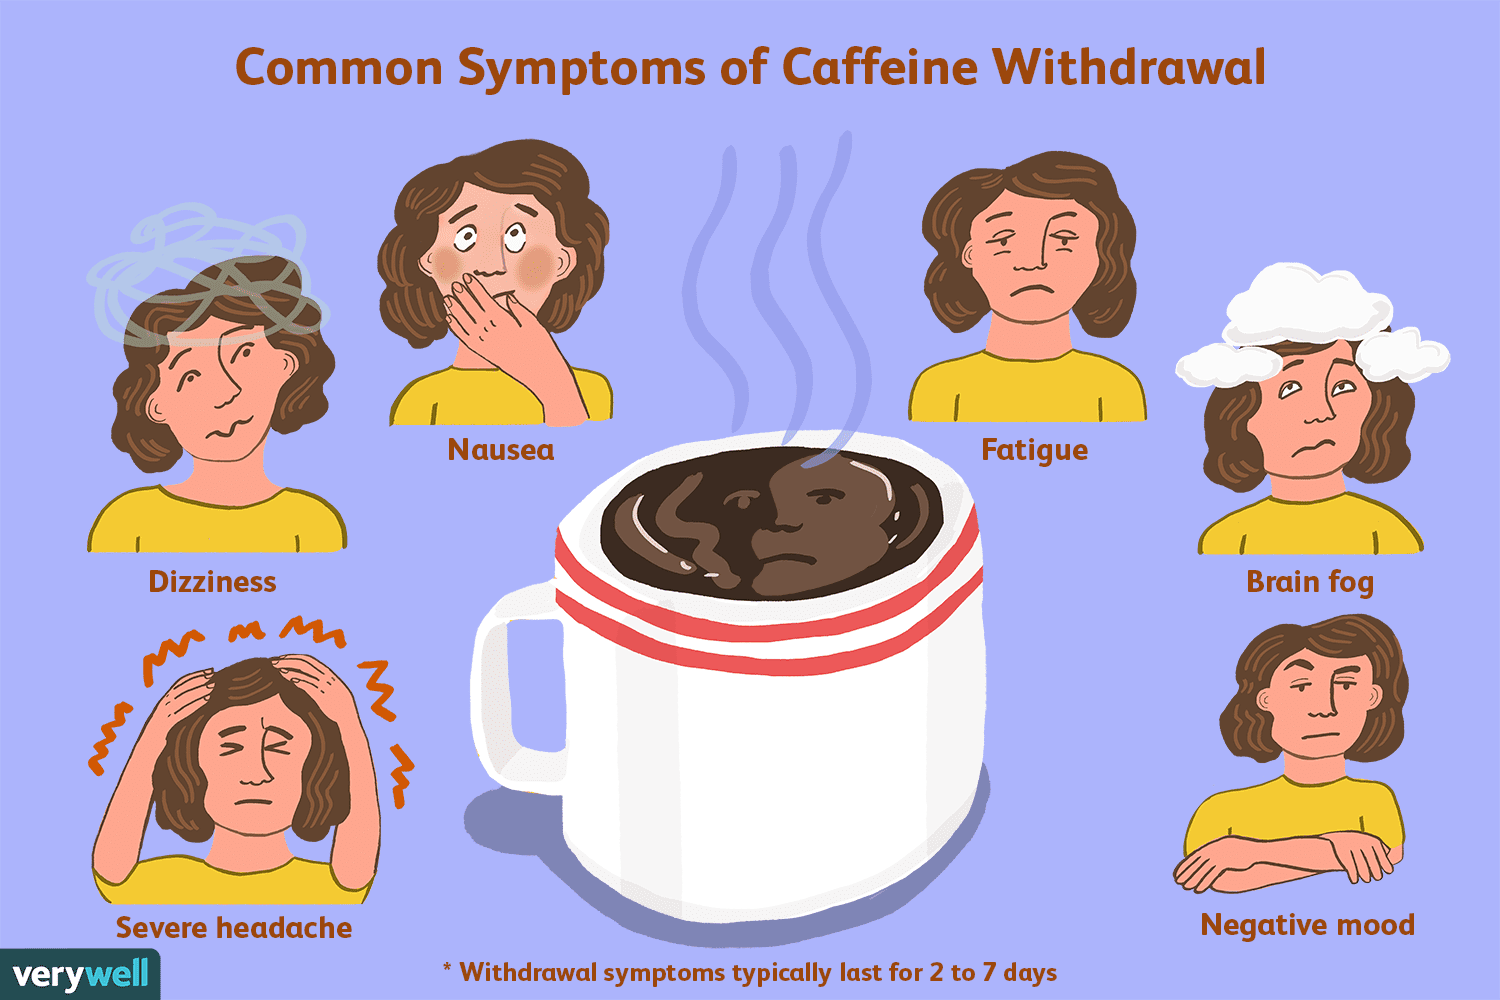 Can Caffeine Withdrawal Cause Stomach Cramps?